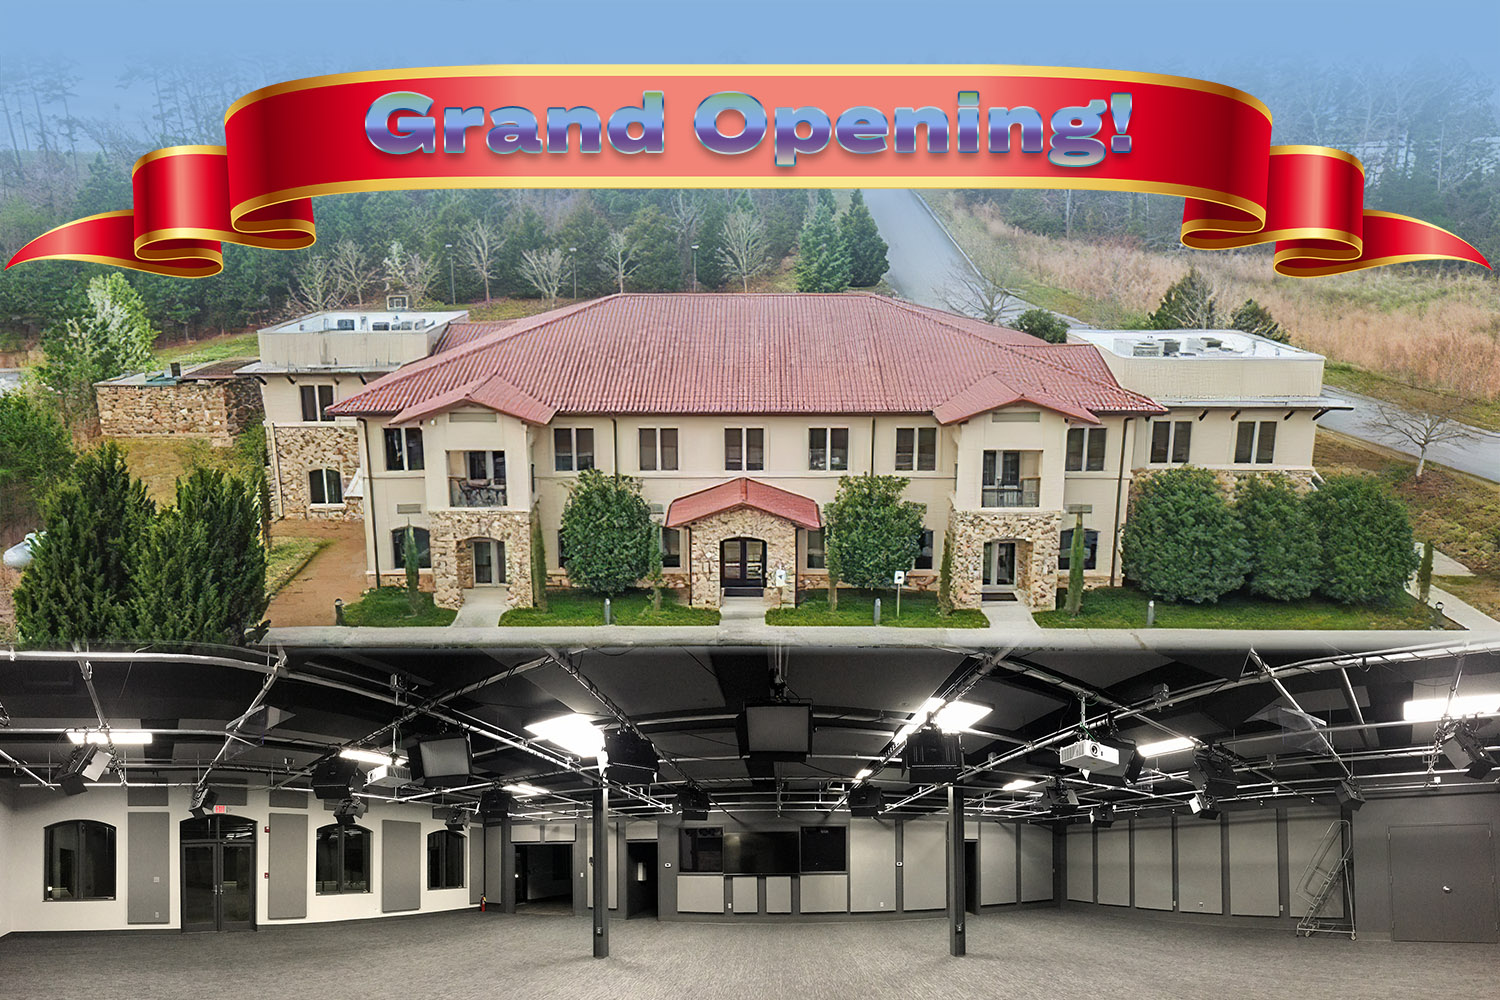 Come And Reason Ministries Grand Opening Invitation!